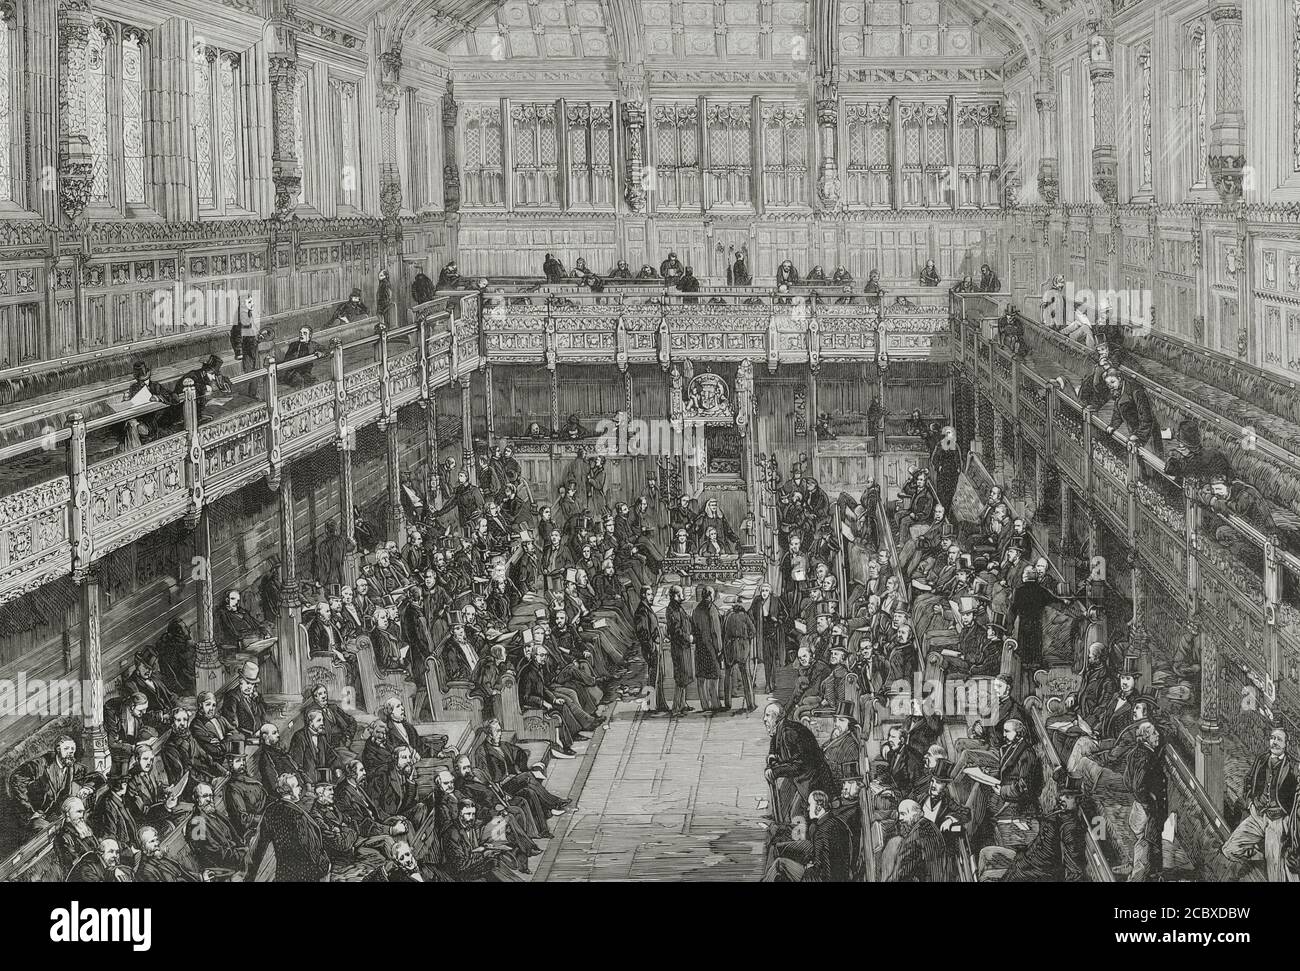 England, London. The House of Commons during the 72-hour session on the ocassion of the discussion about the Bill, on coercive measures in Ireland. The Members of Parliament supporting the Gladstone government on the one hand, and the supporters of the Irish Land League on the other, led by their leader in Parliament, Mr Parnell. Engraving. La Ilustracion Española y Americana, 1881. Stock Photo